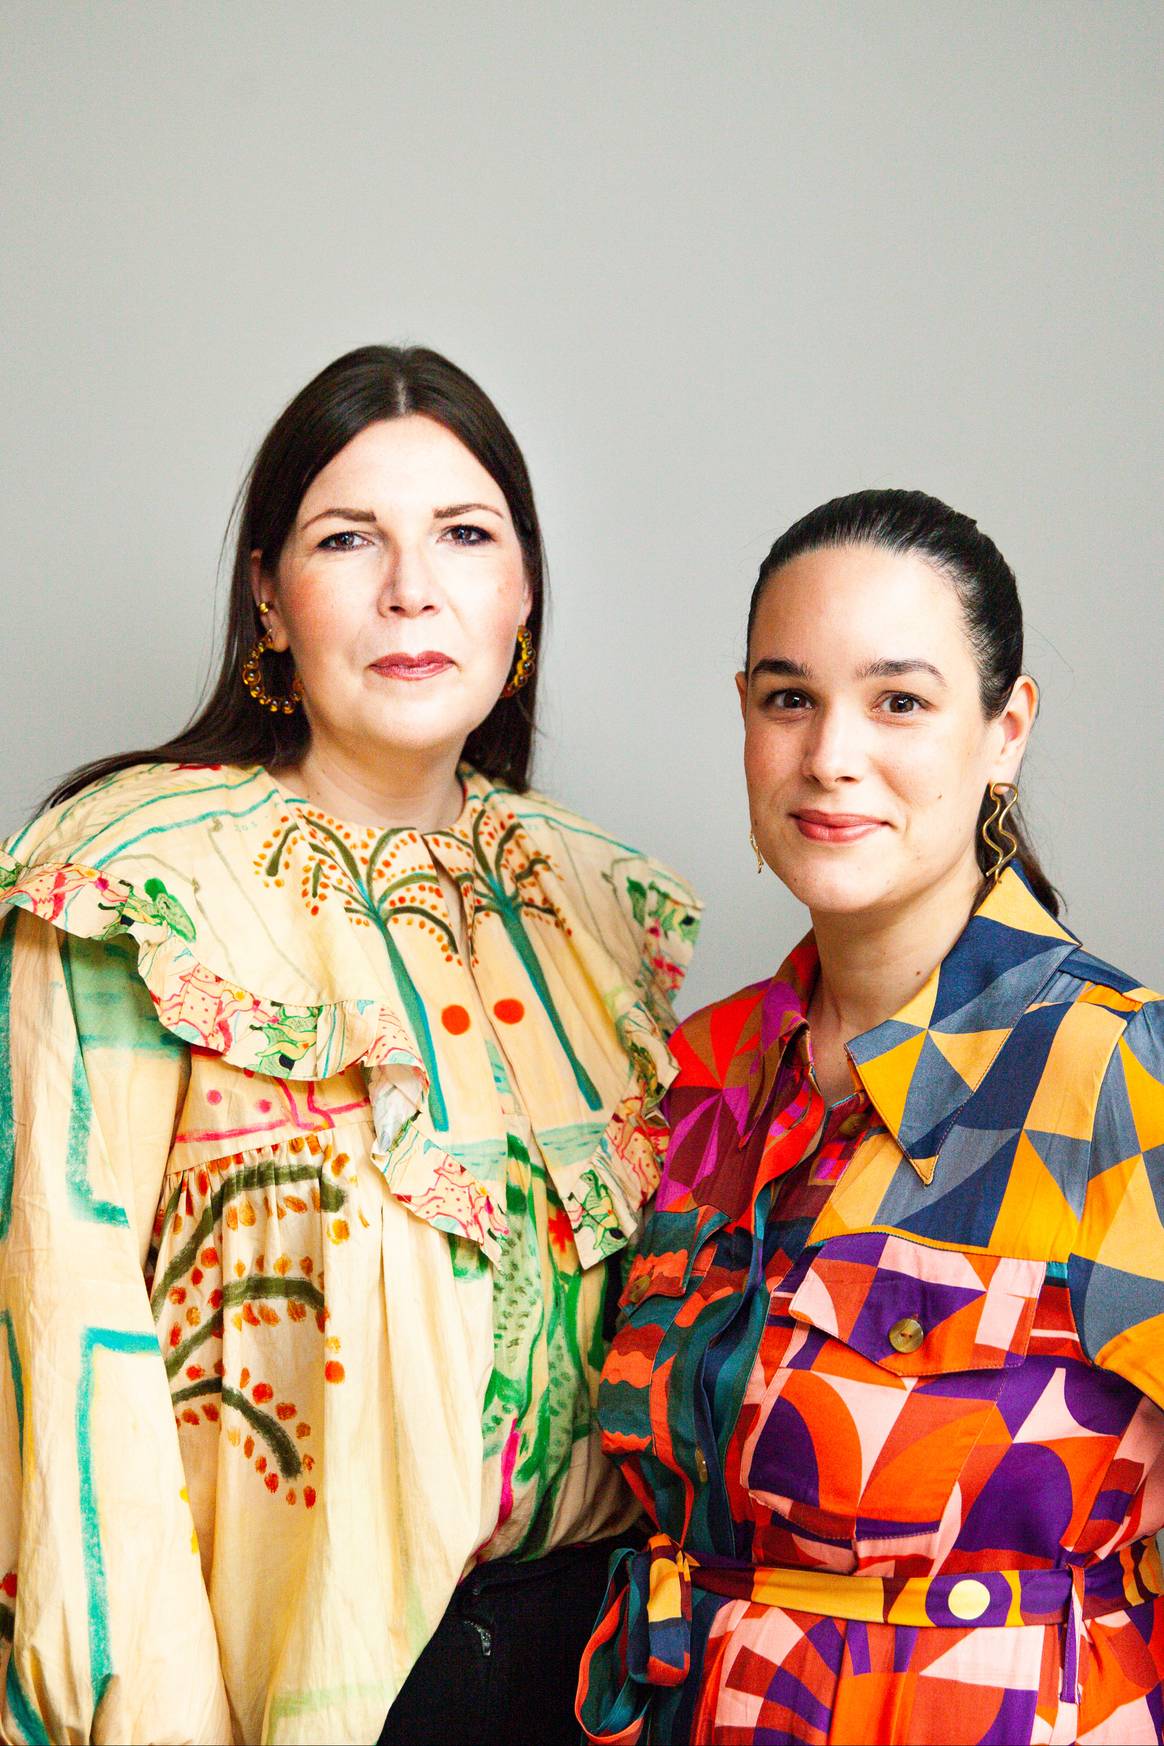 Caroline Foerster and Ann-Kathrin Zotz, founders of White Label Project